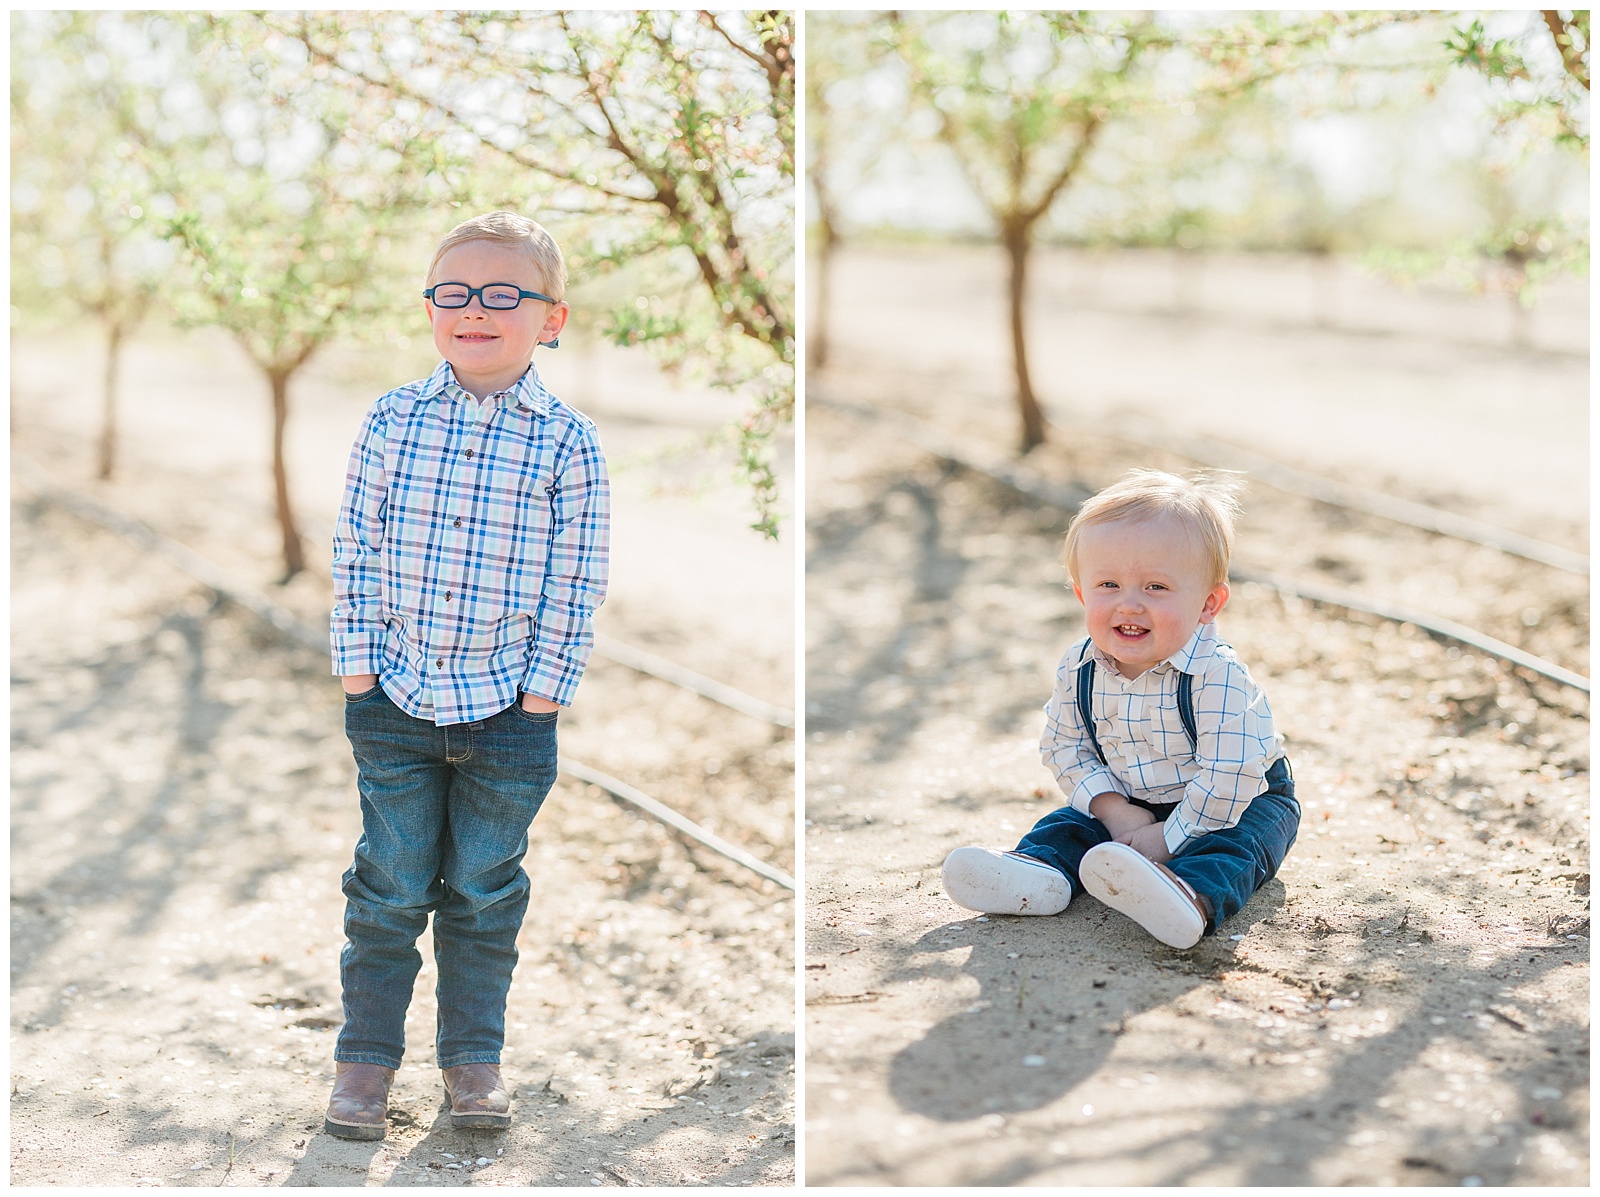 annual portraits for kids by Megan Helm Photograhy, a fresno photographer